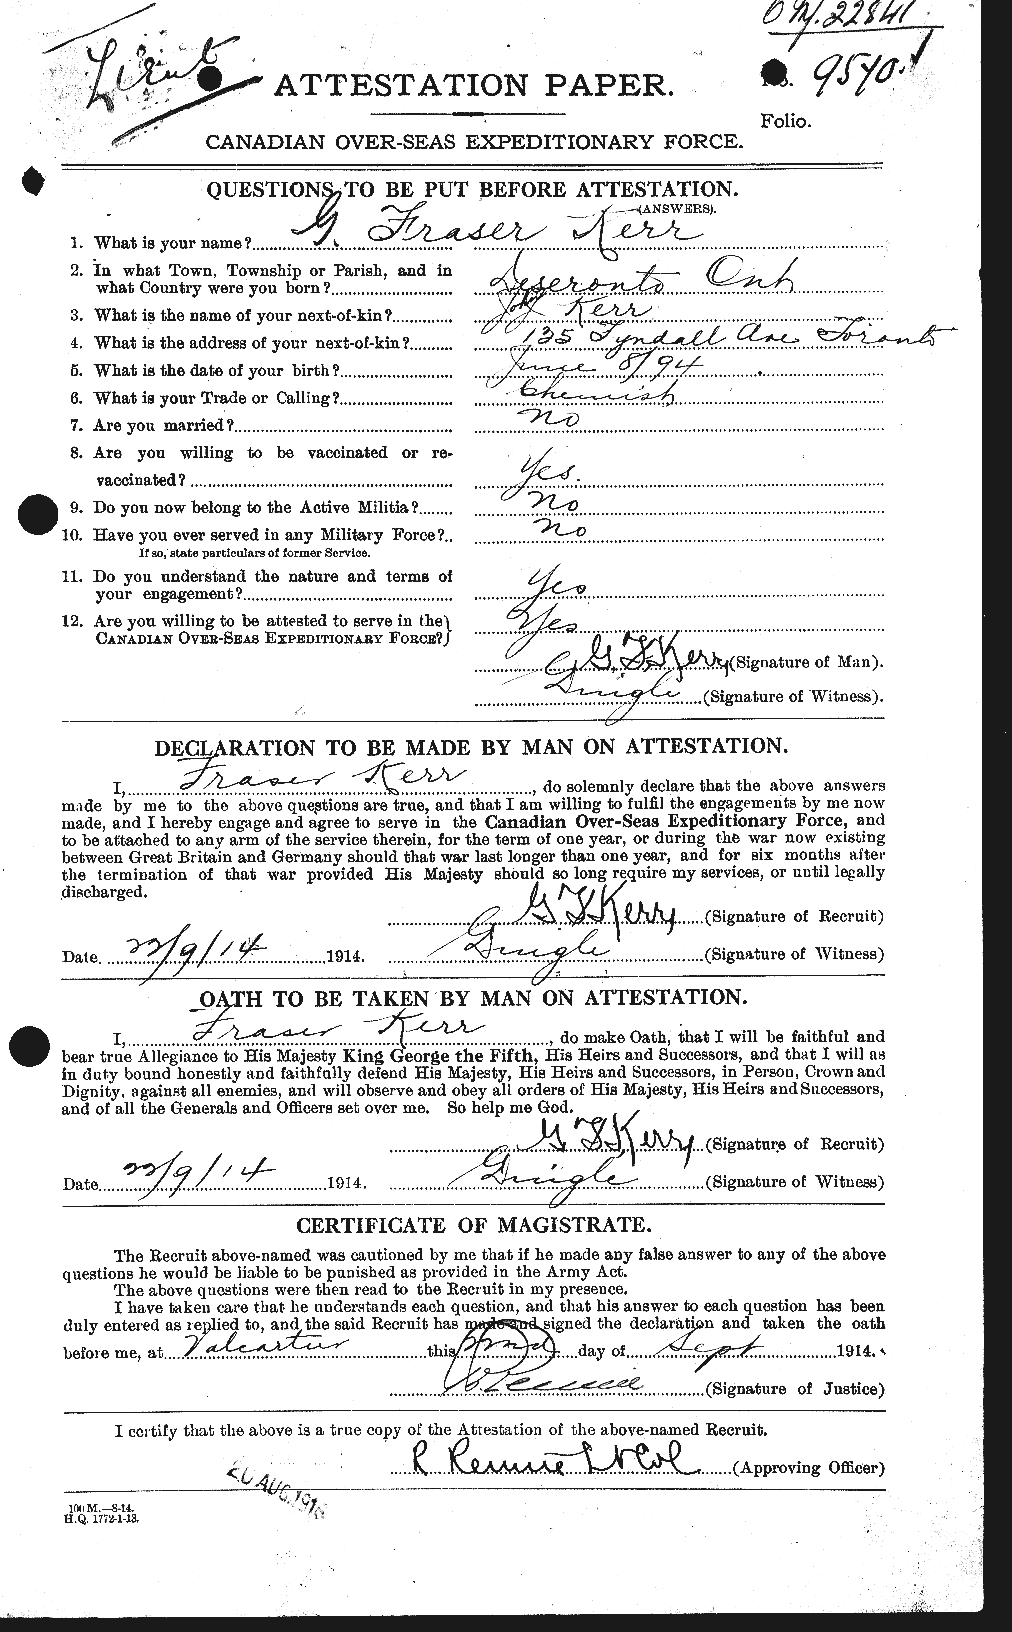 Personnel Records of the First World War - CEF 431944a